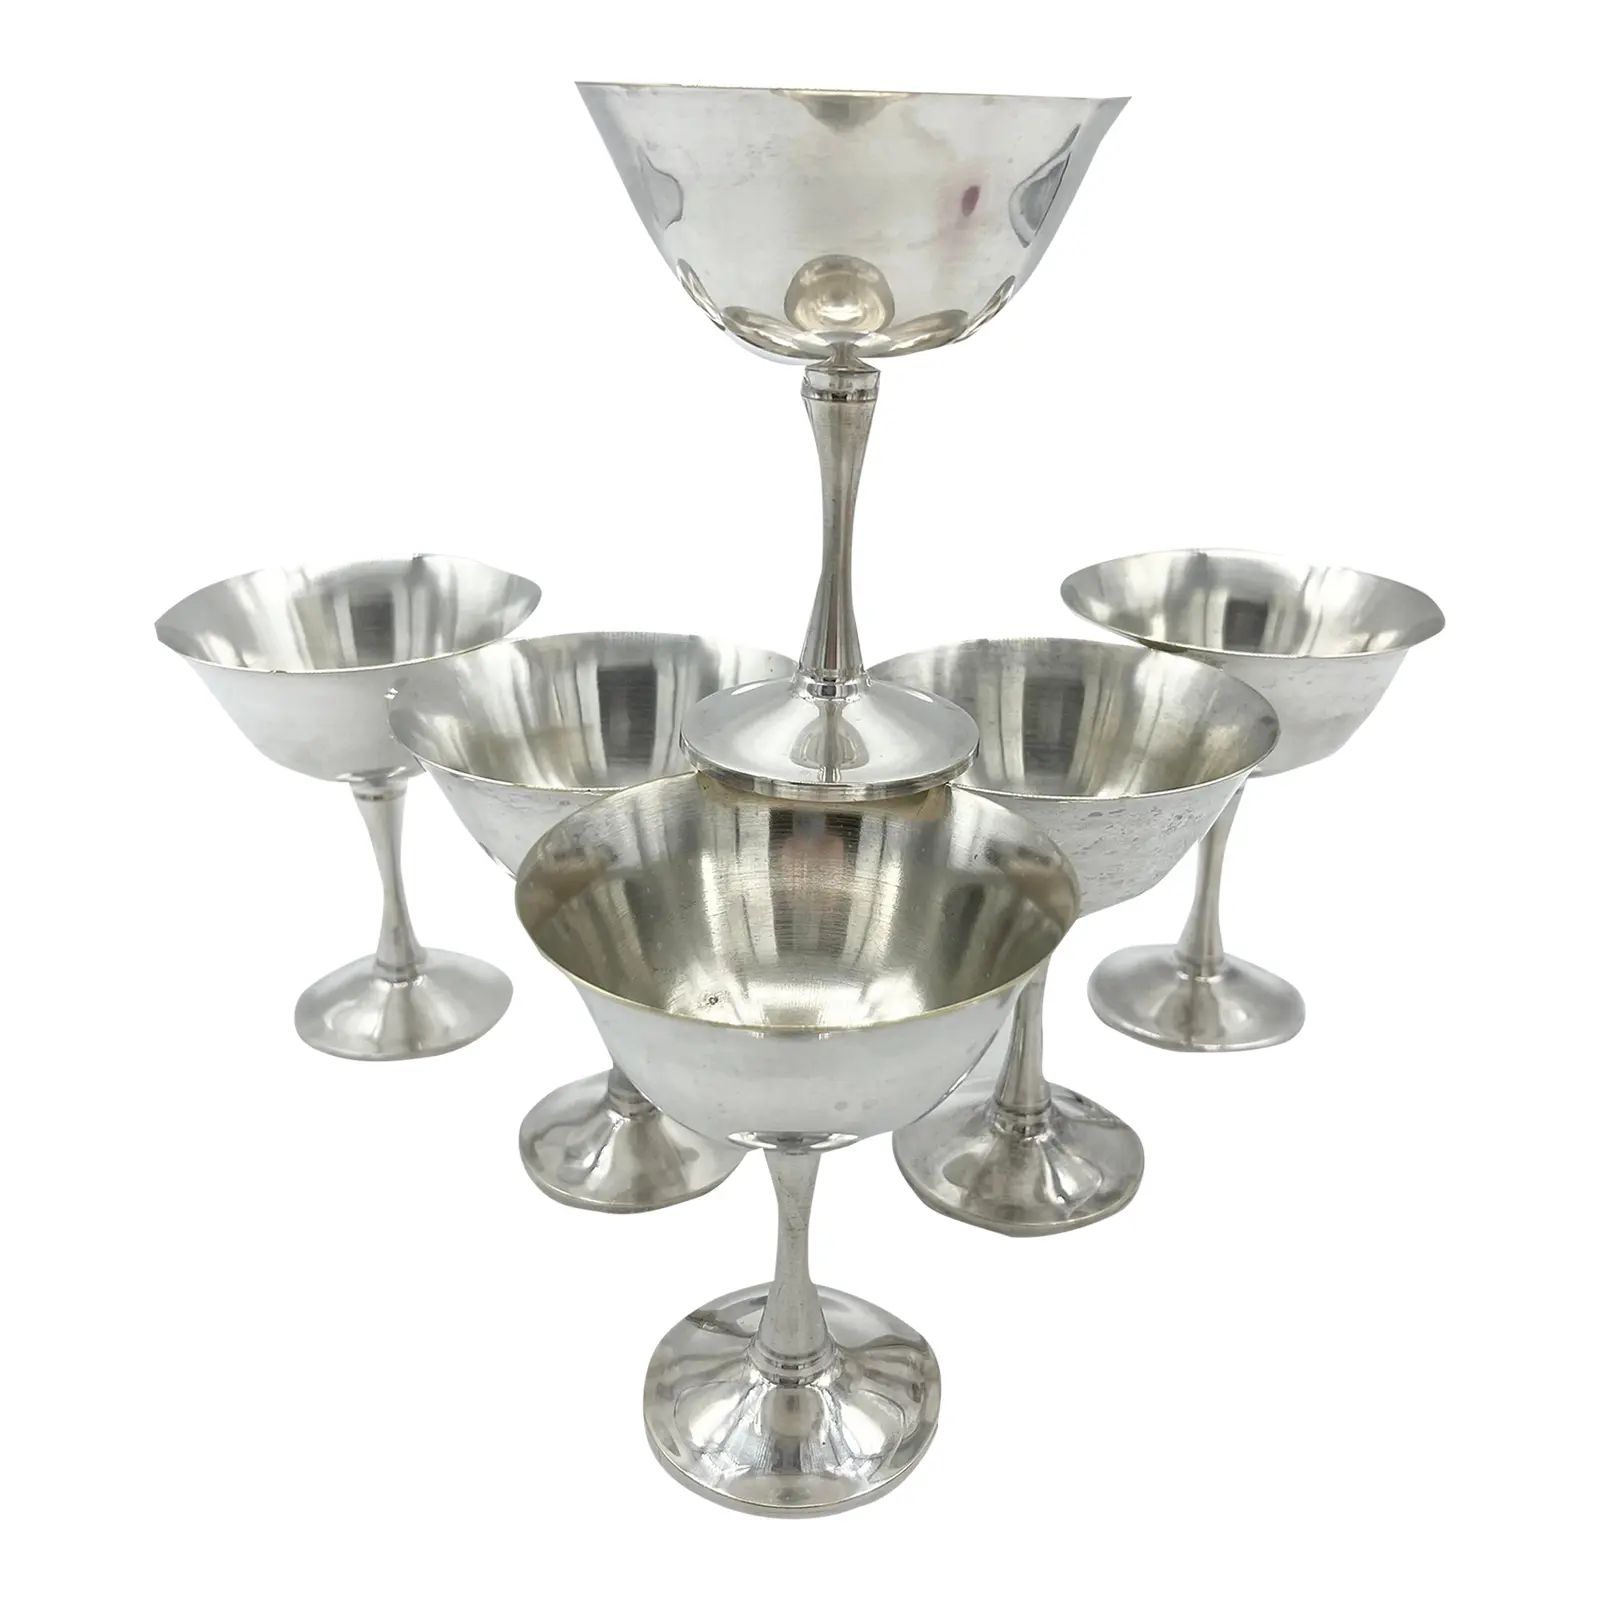 Vintage Silver Plate Champagne Coupes-Set of 6 | Chairish